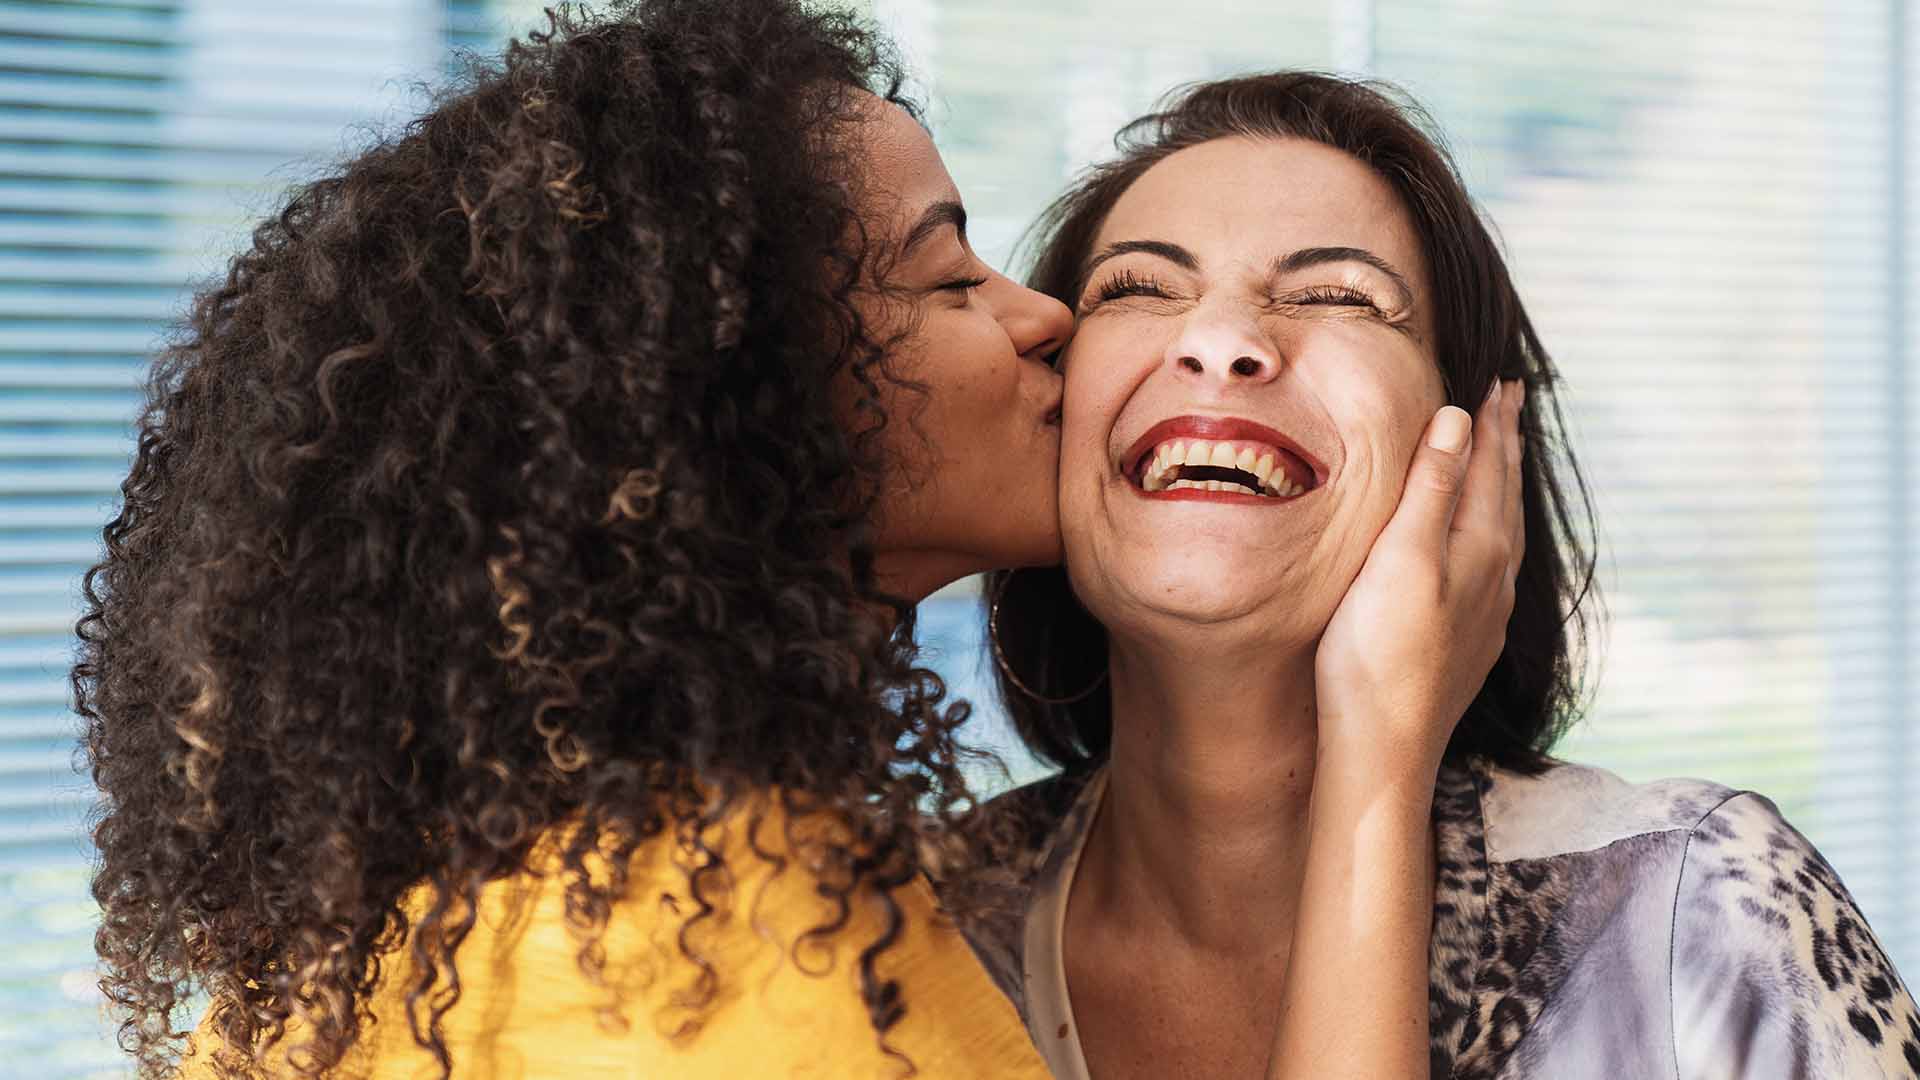 Daughter kissing mom on the cheek